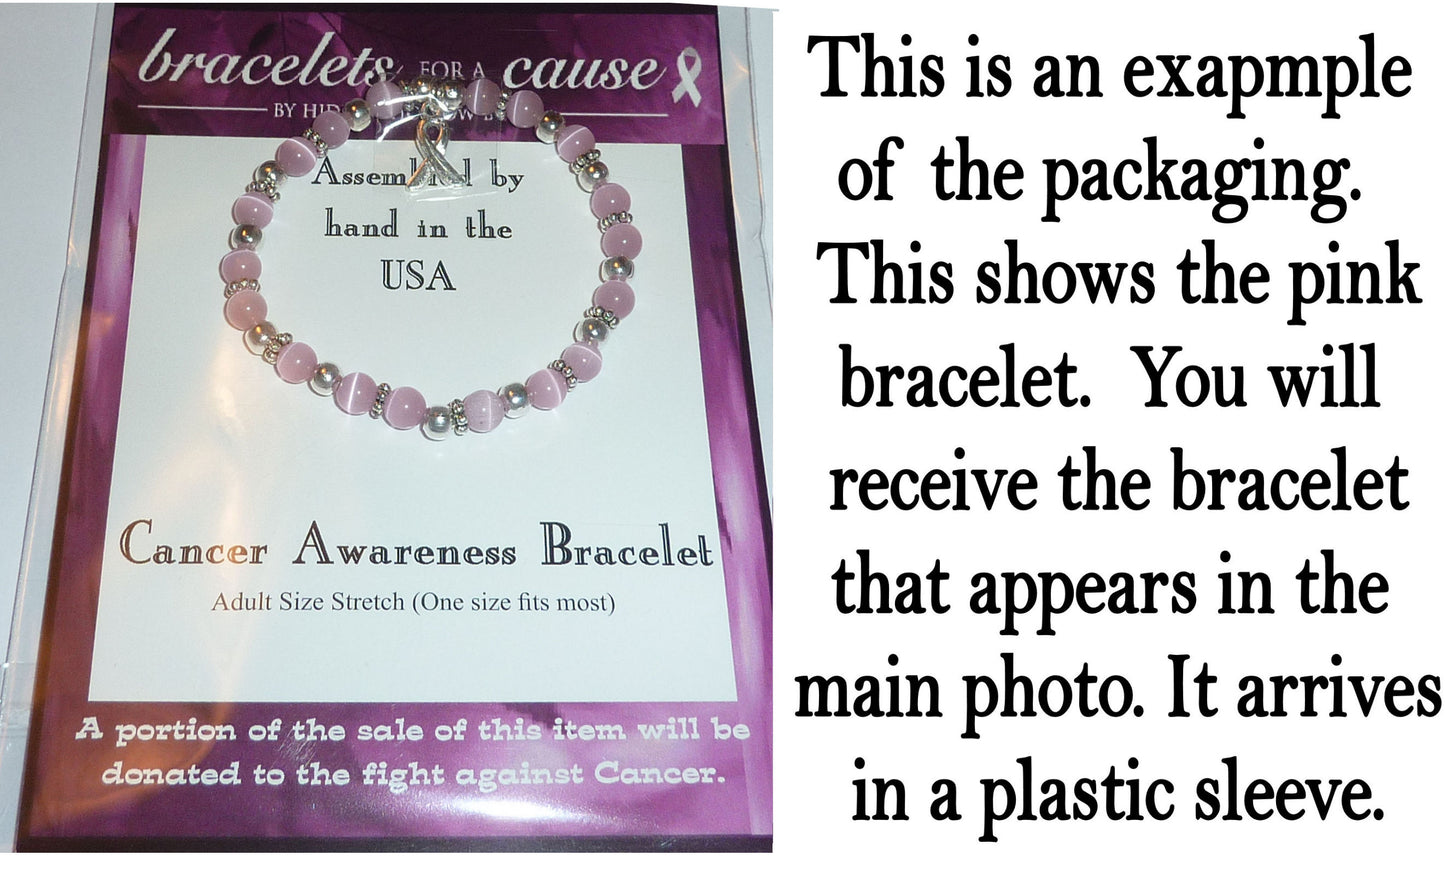 Blue (Colon Cancer) Packaged Cancer Awareness Bracelet 6mm - Stretch (will stretch to fit most Adults)